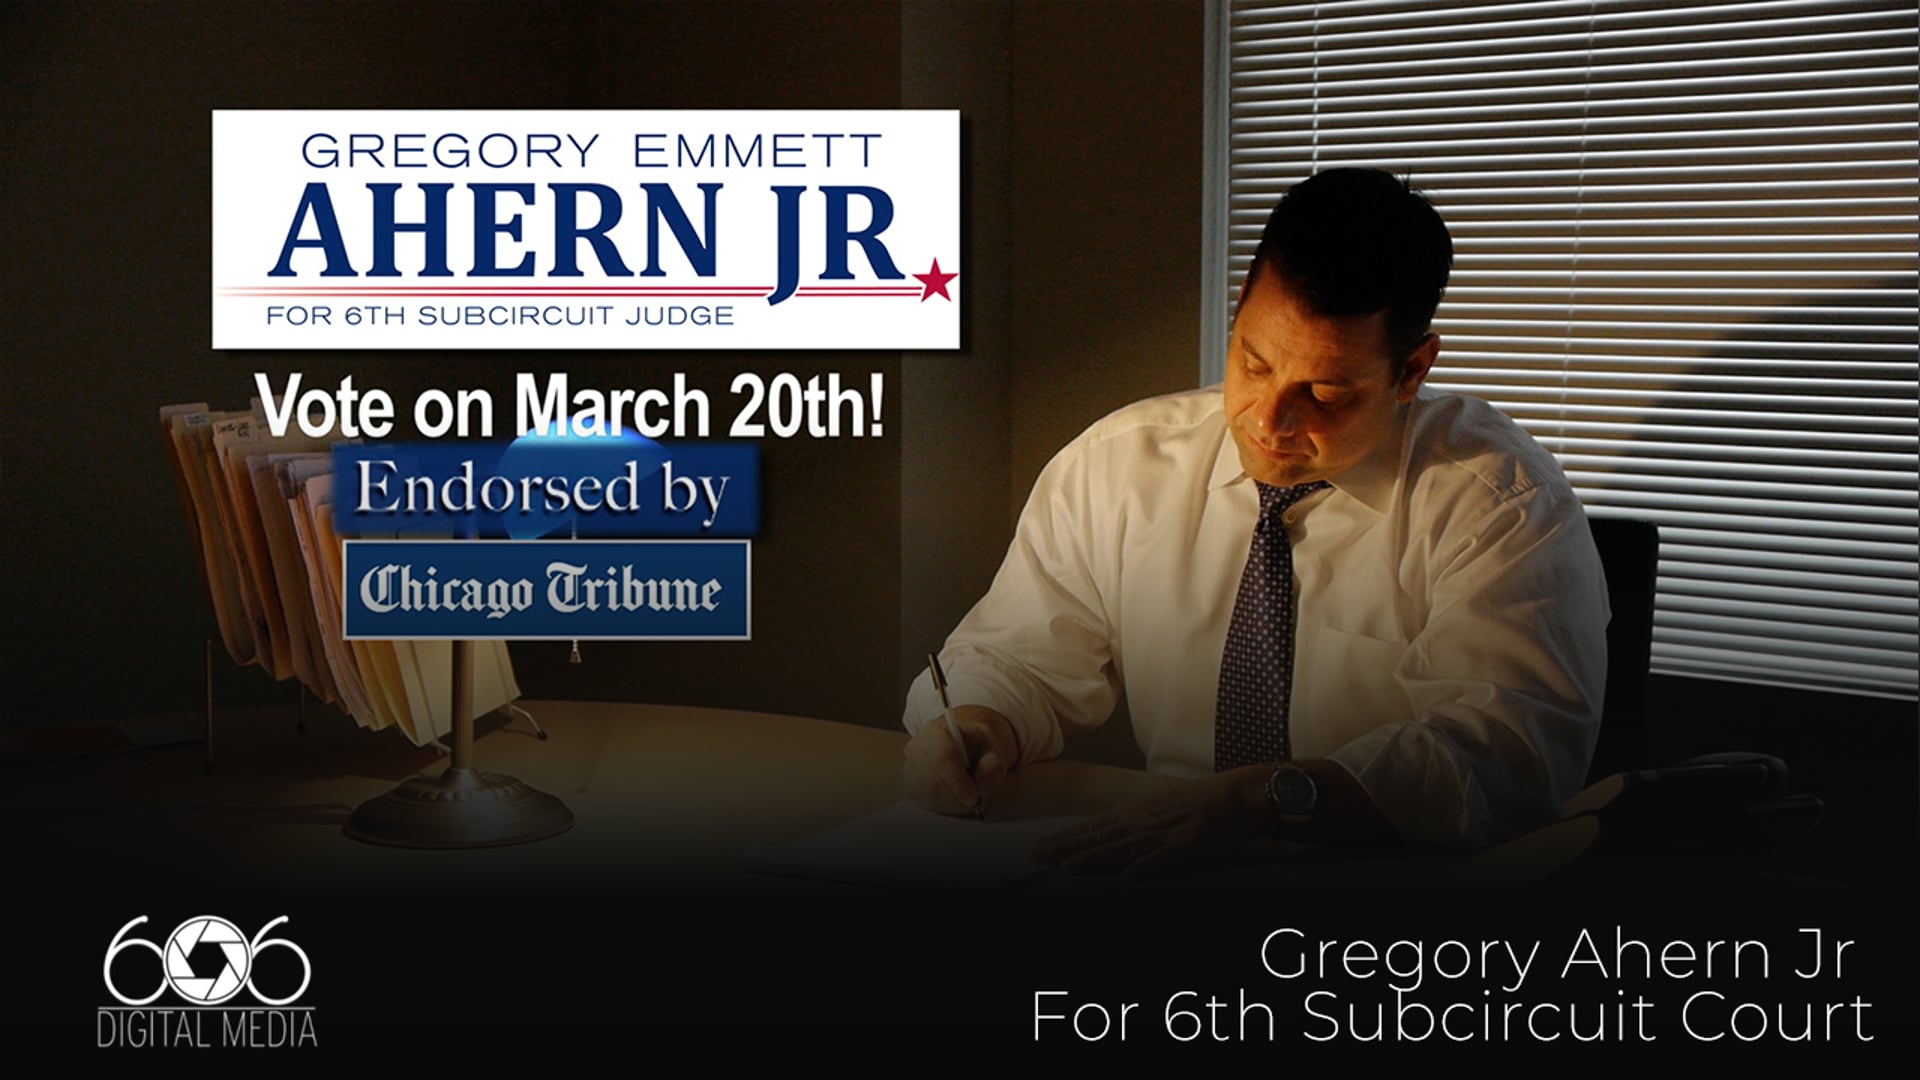 Greg Ahern for 6th Subcircuit Judge